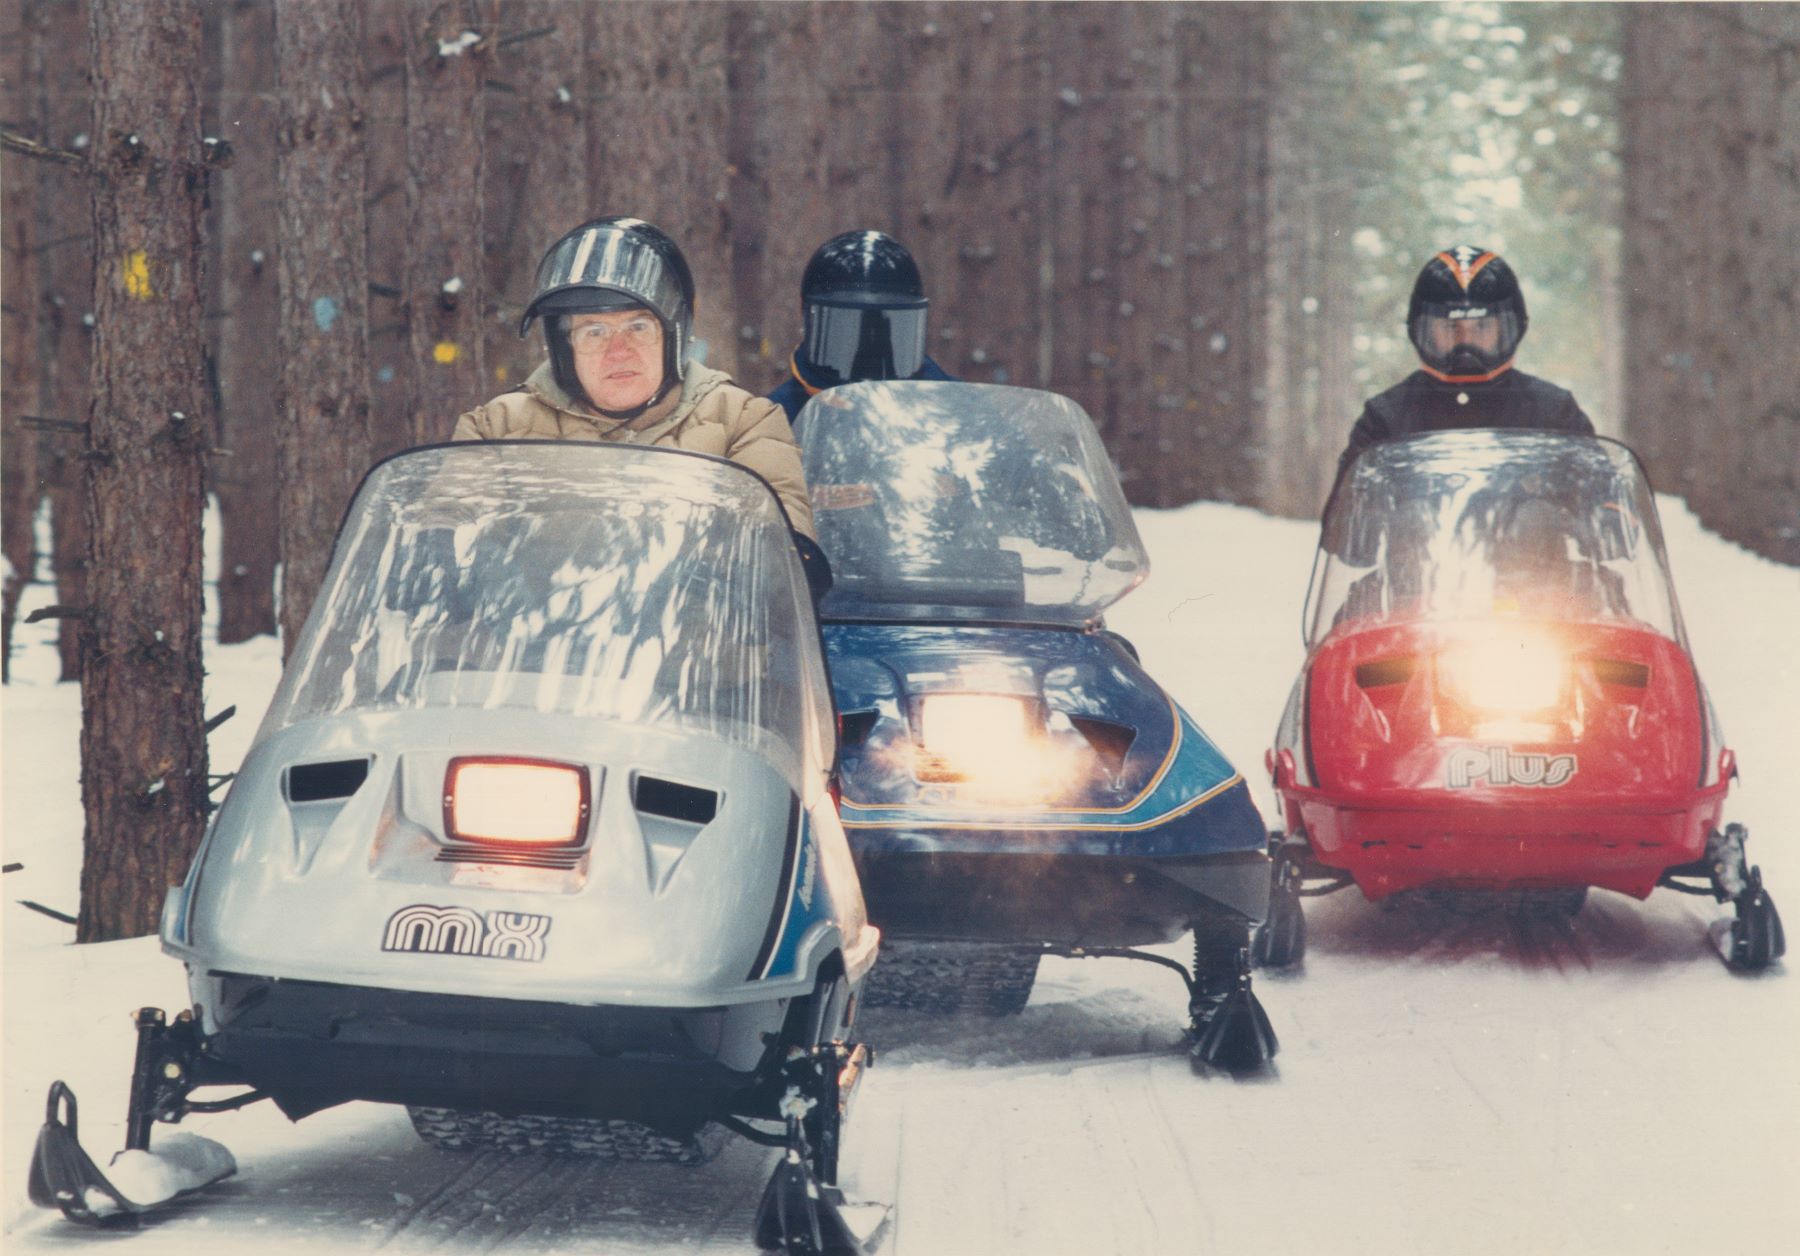 A group of snowmobilers practicing snowmobile safety by wearing helmets and traveling together in the winter snow